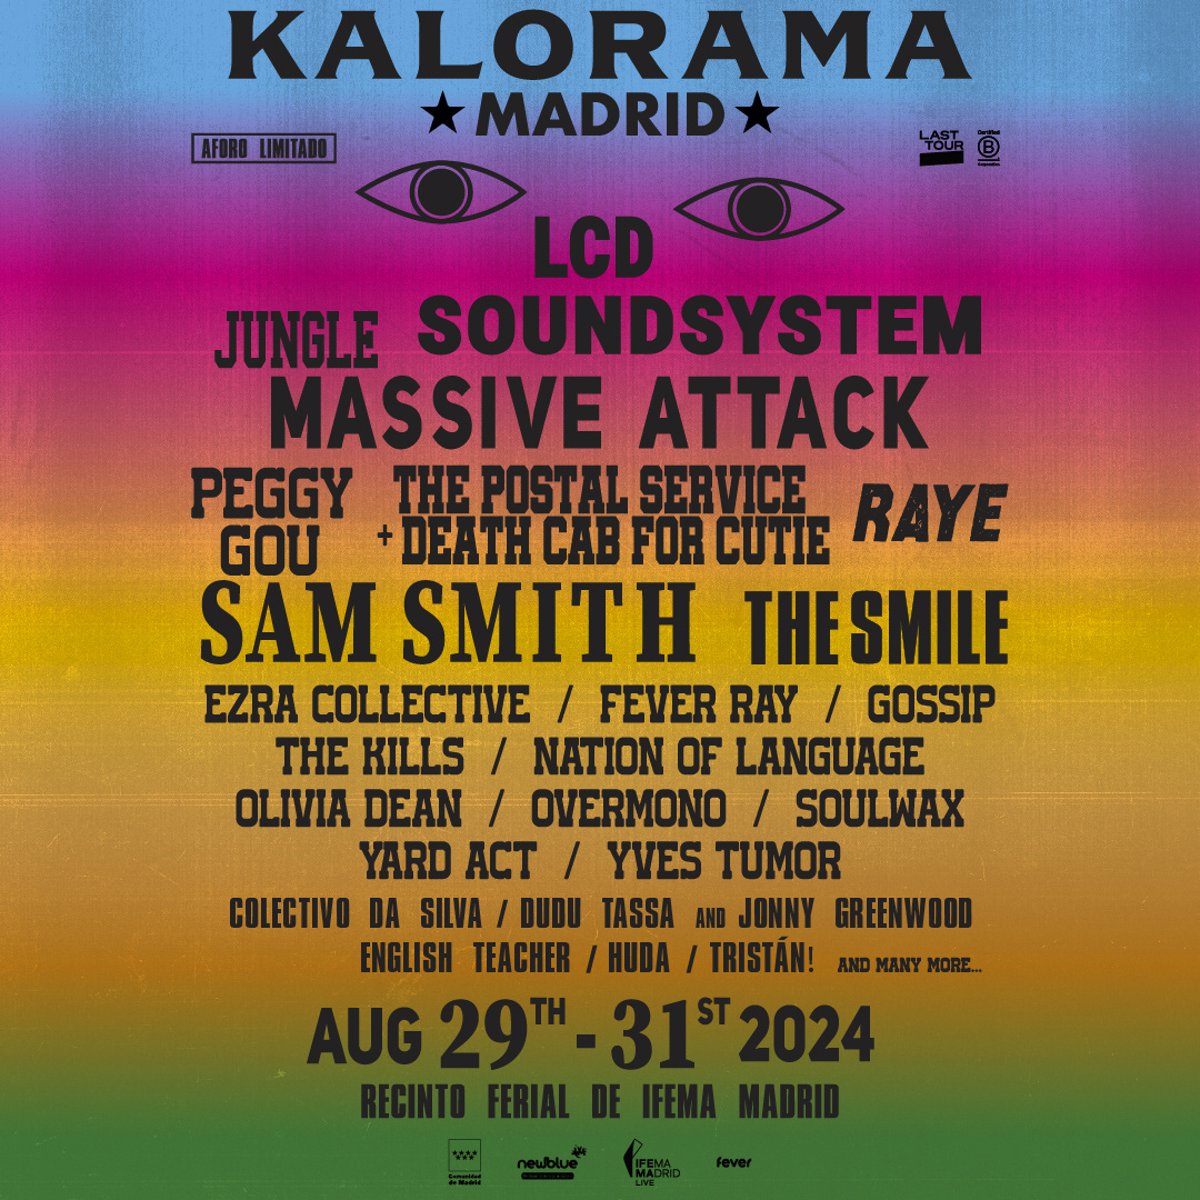 The KALORAMA festival will arrive in Madrid in August with artists such as Jungle, LCD Soundsystem, Peggy Gou, Raye and Sam Smith